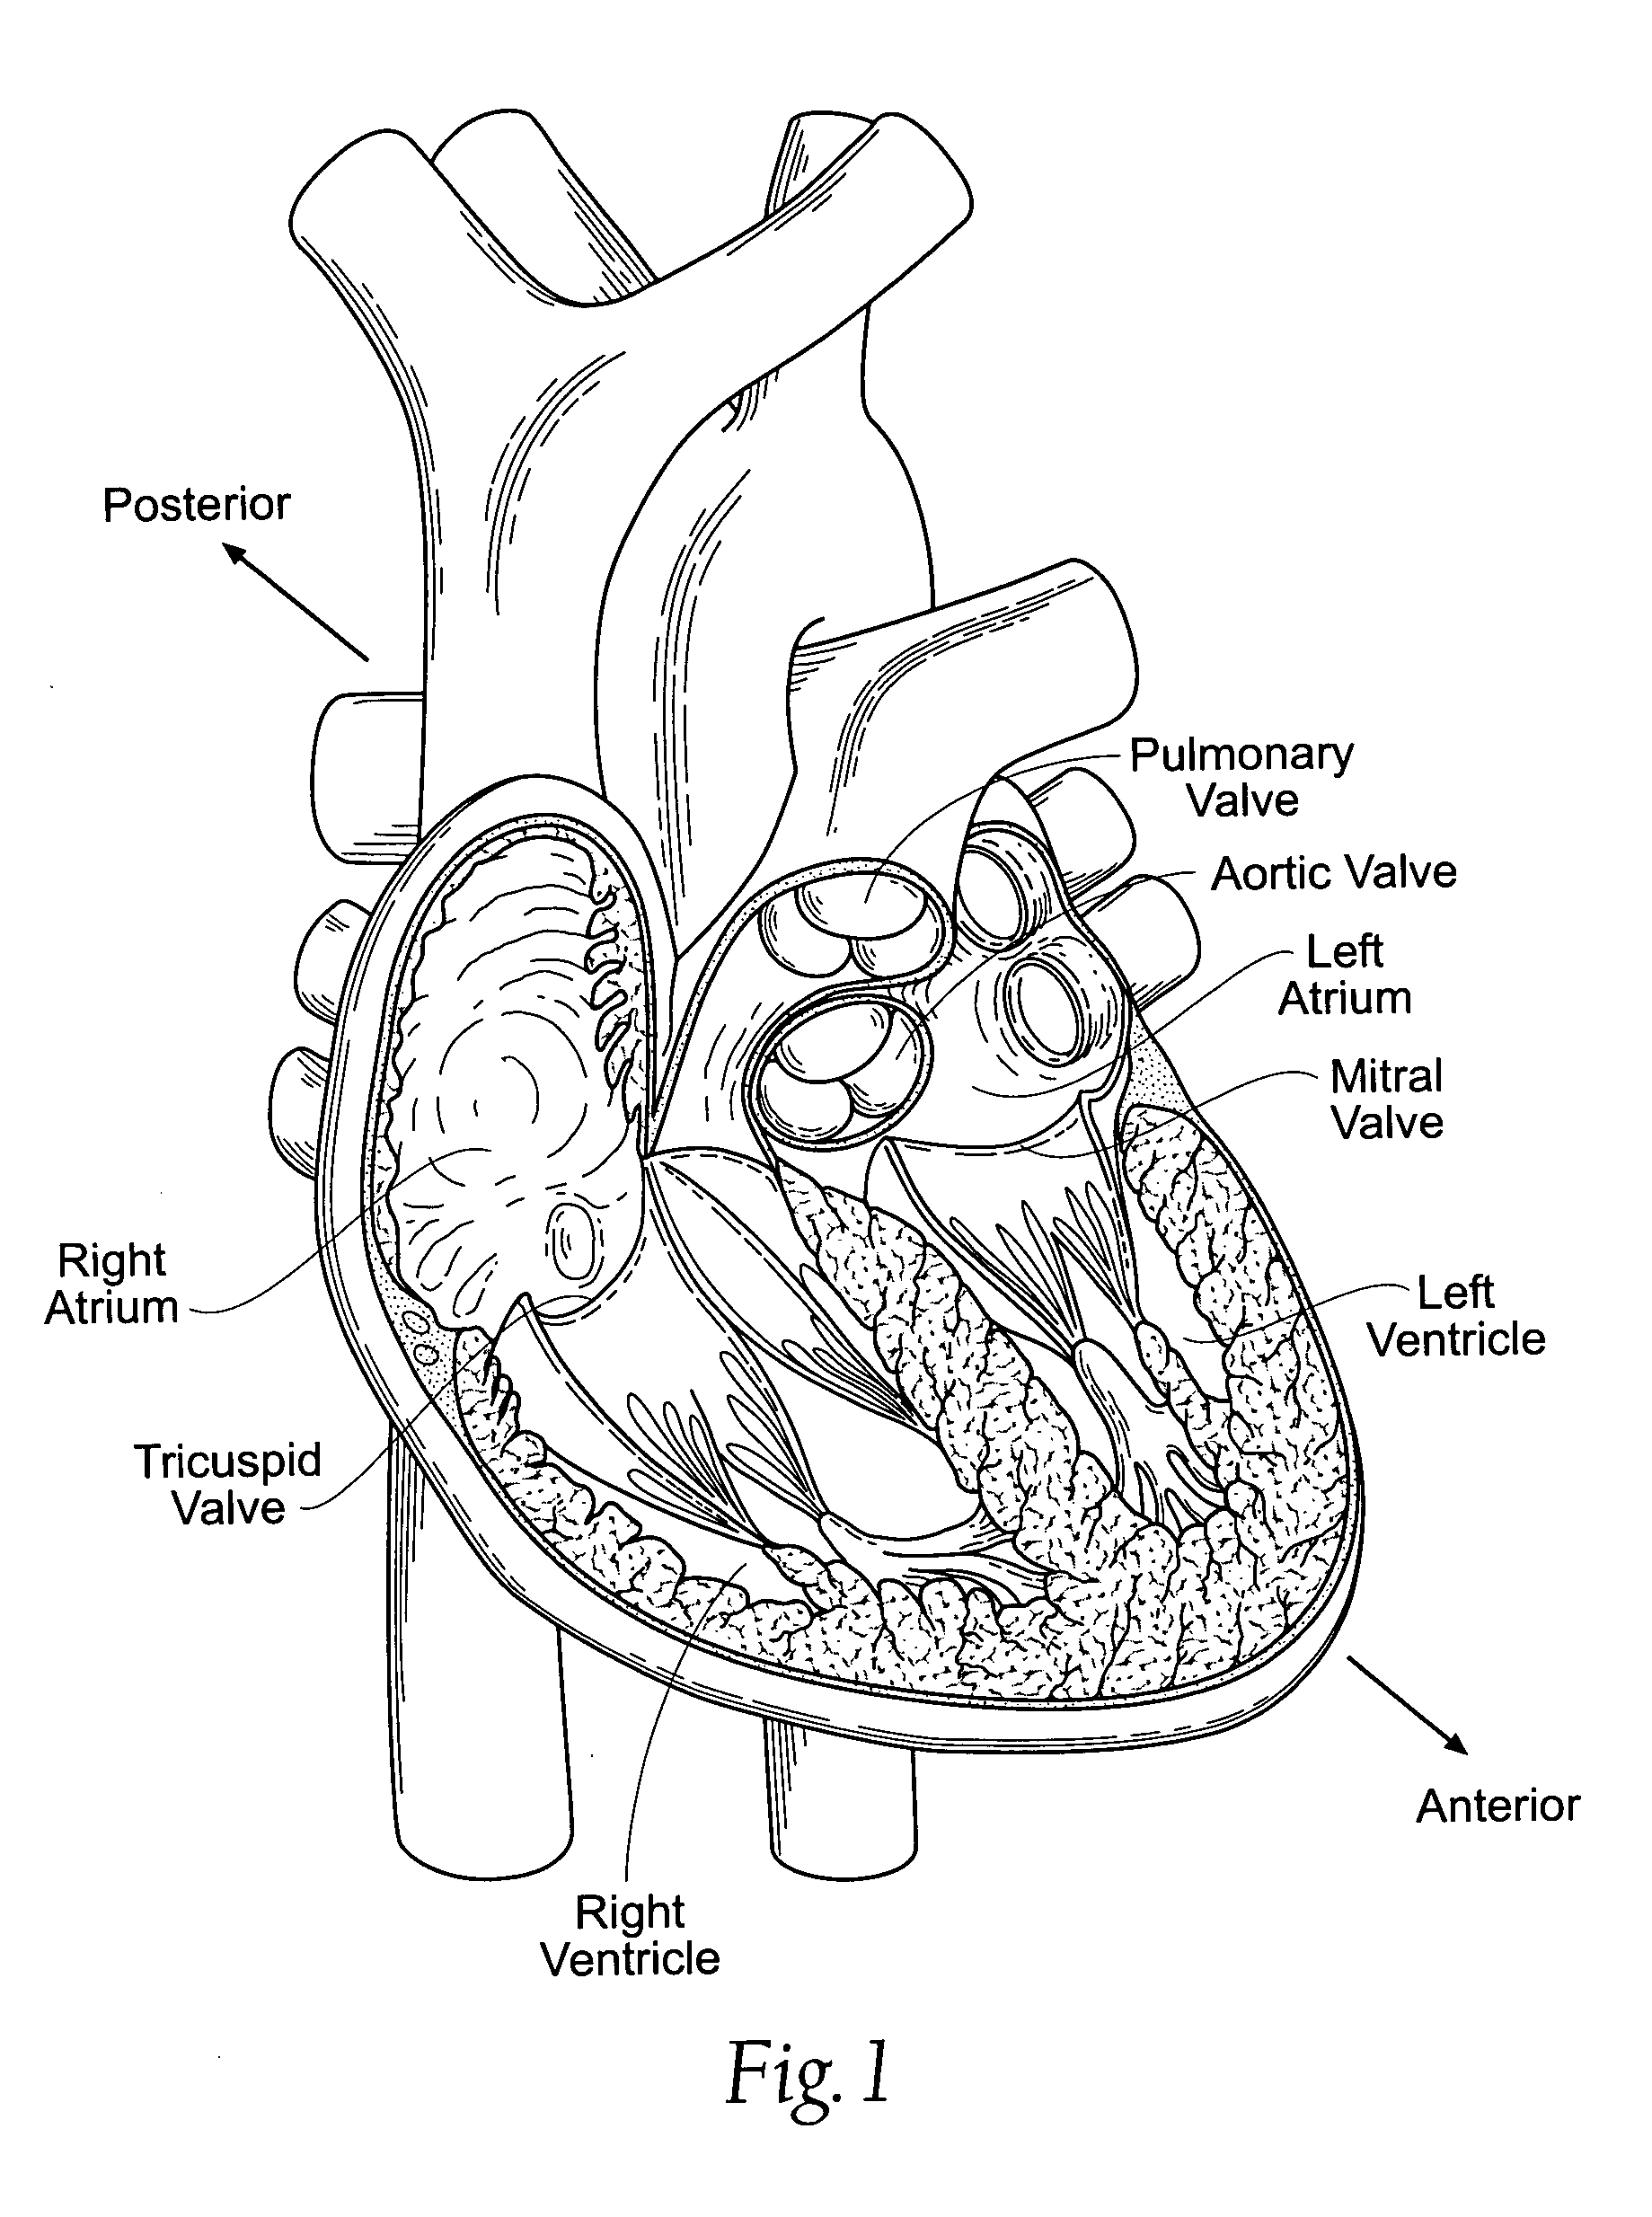 Devices, systems, and methods for retaining a native heart valve leaflet